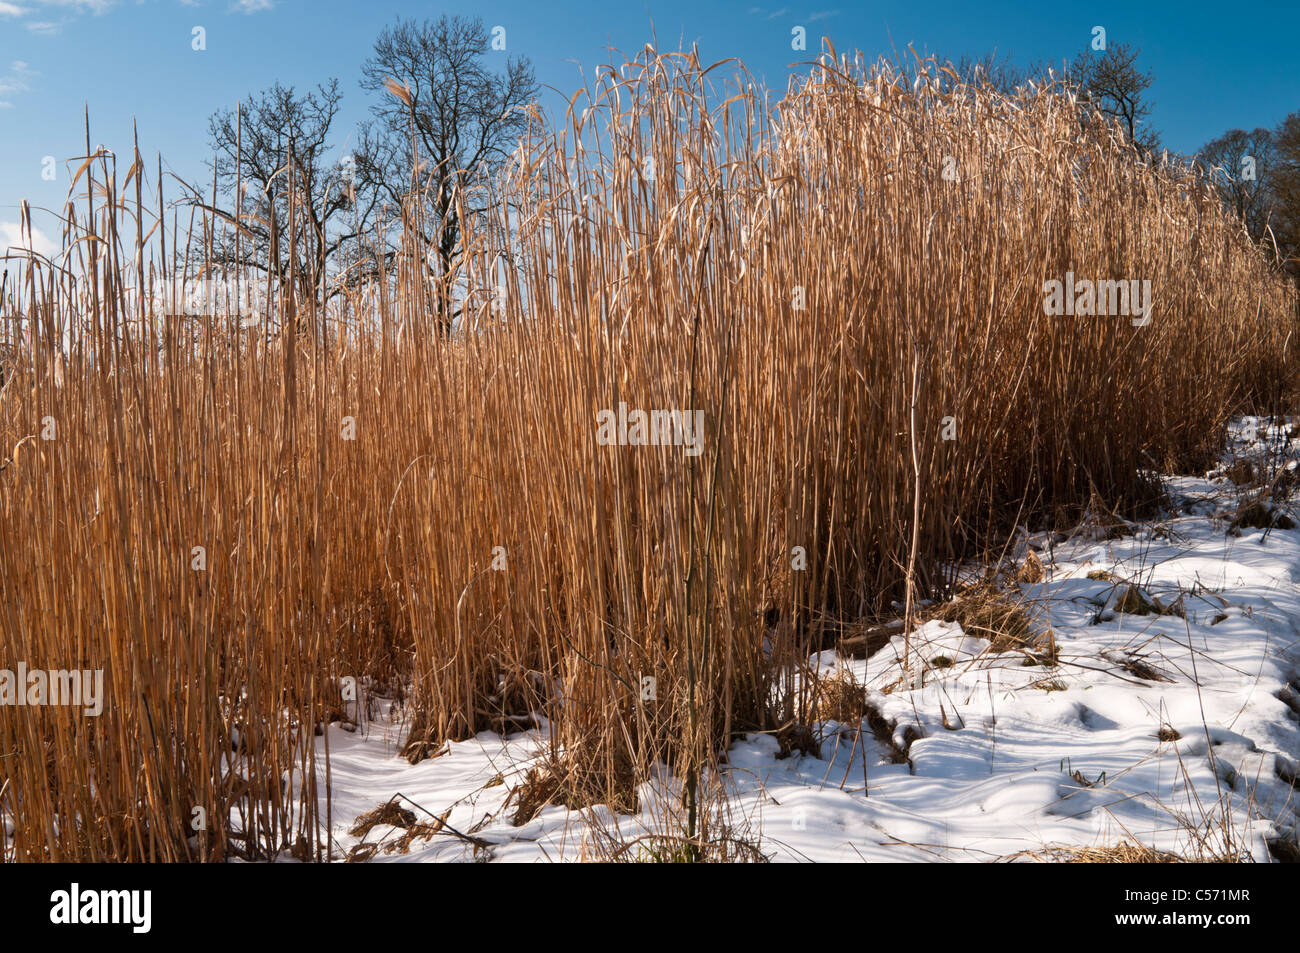 Elephant Grass almost ready for harvesting, with its golden stalks bathed in warm winter sunshine, Northamptonshire, England Stock Photo